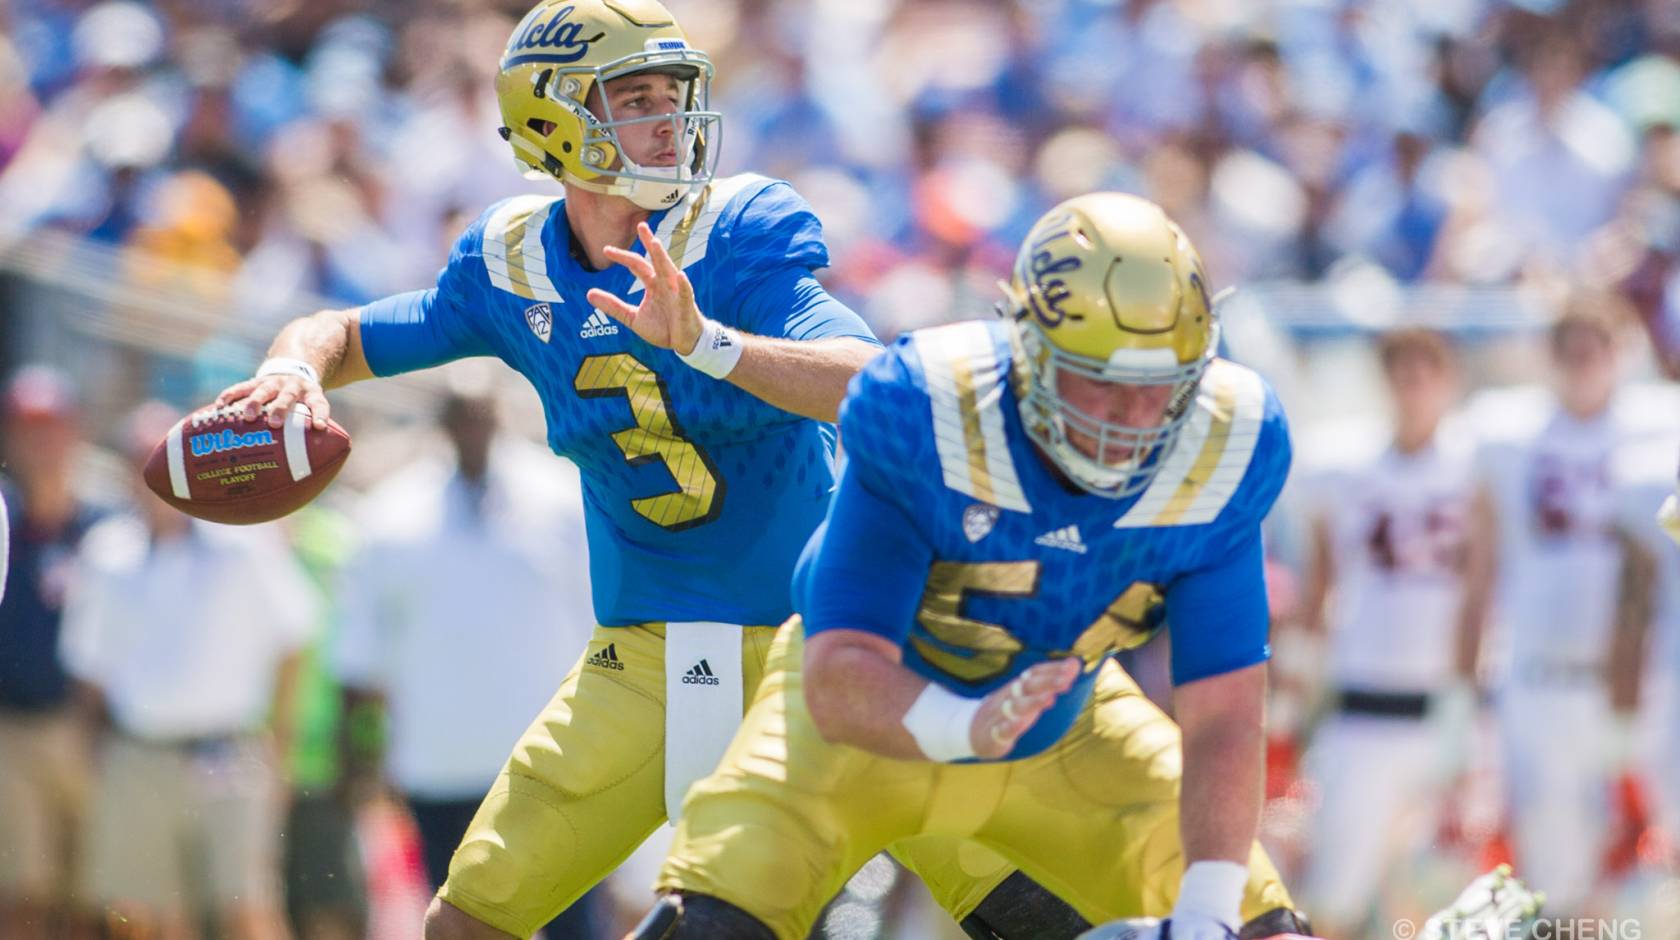 A quarterback in UCLA colors, blue and gold, angles his arm for a pass, while a center, the Niners' Jake Brendel, protects him